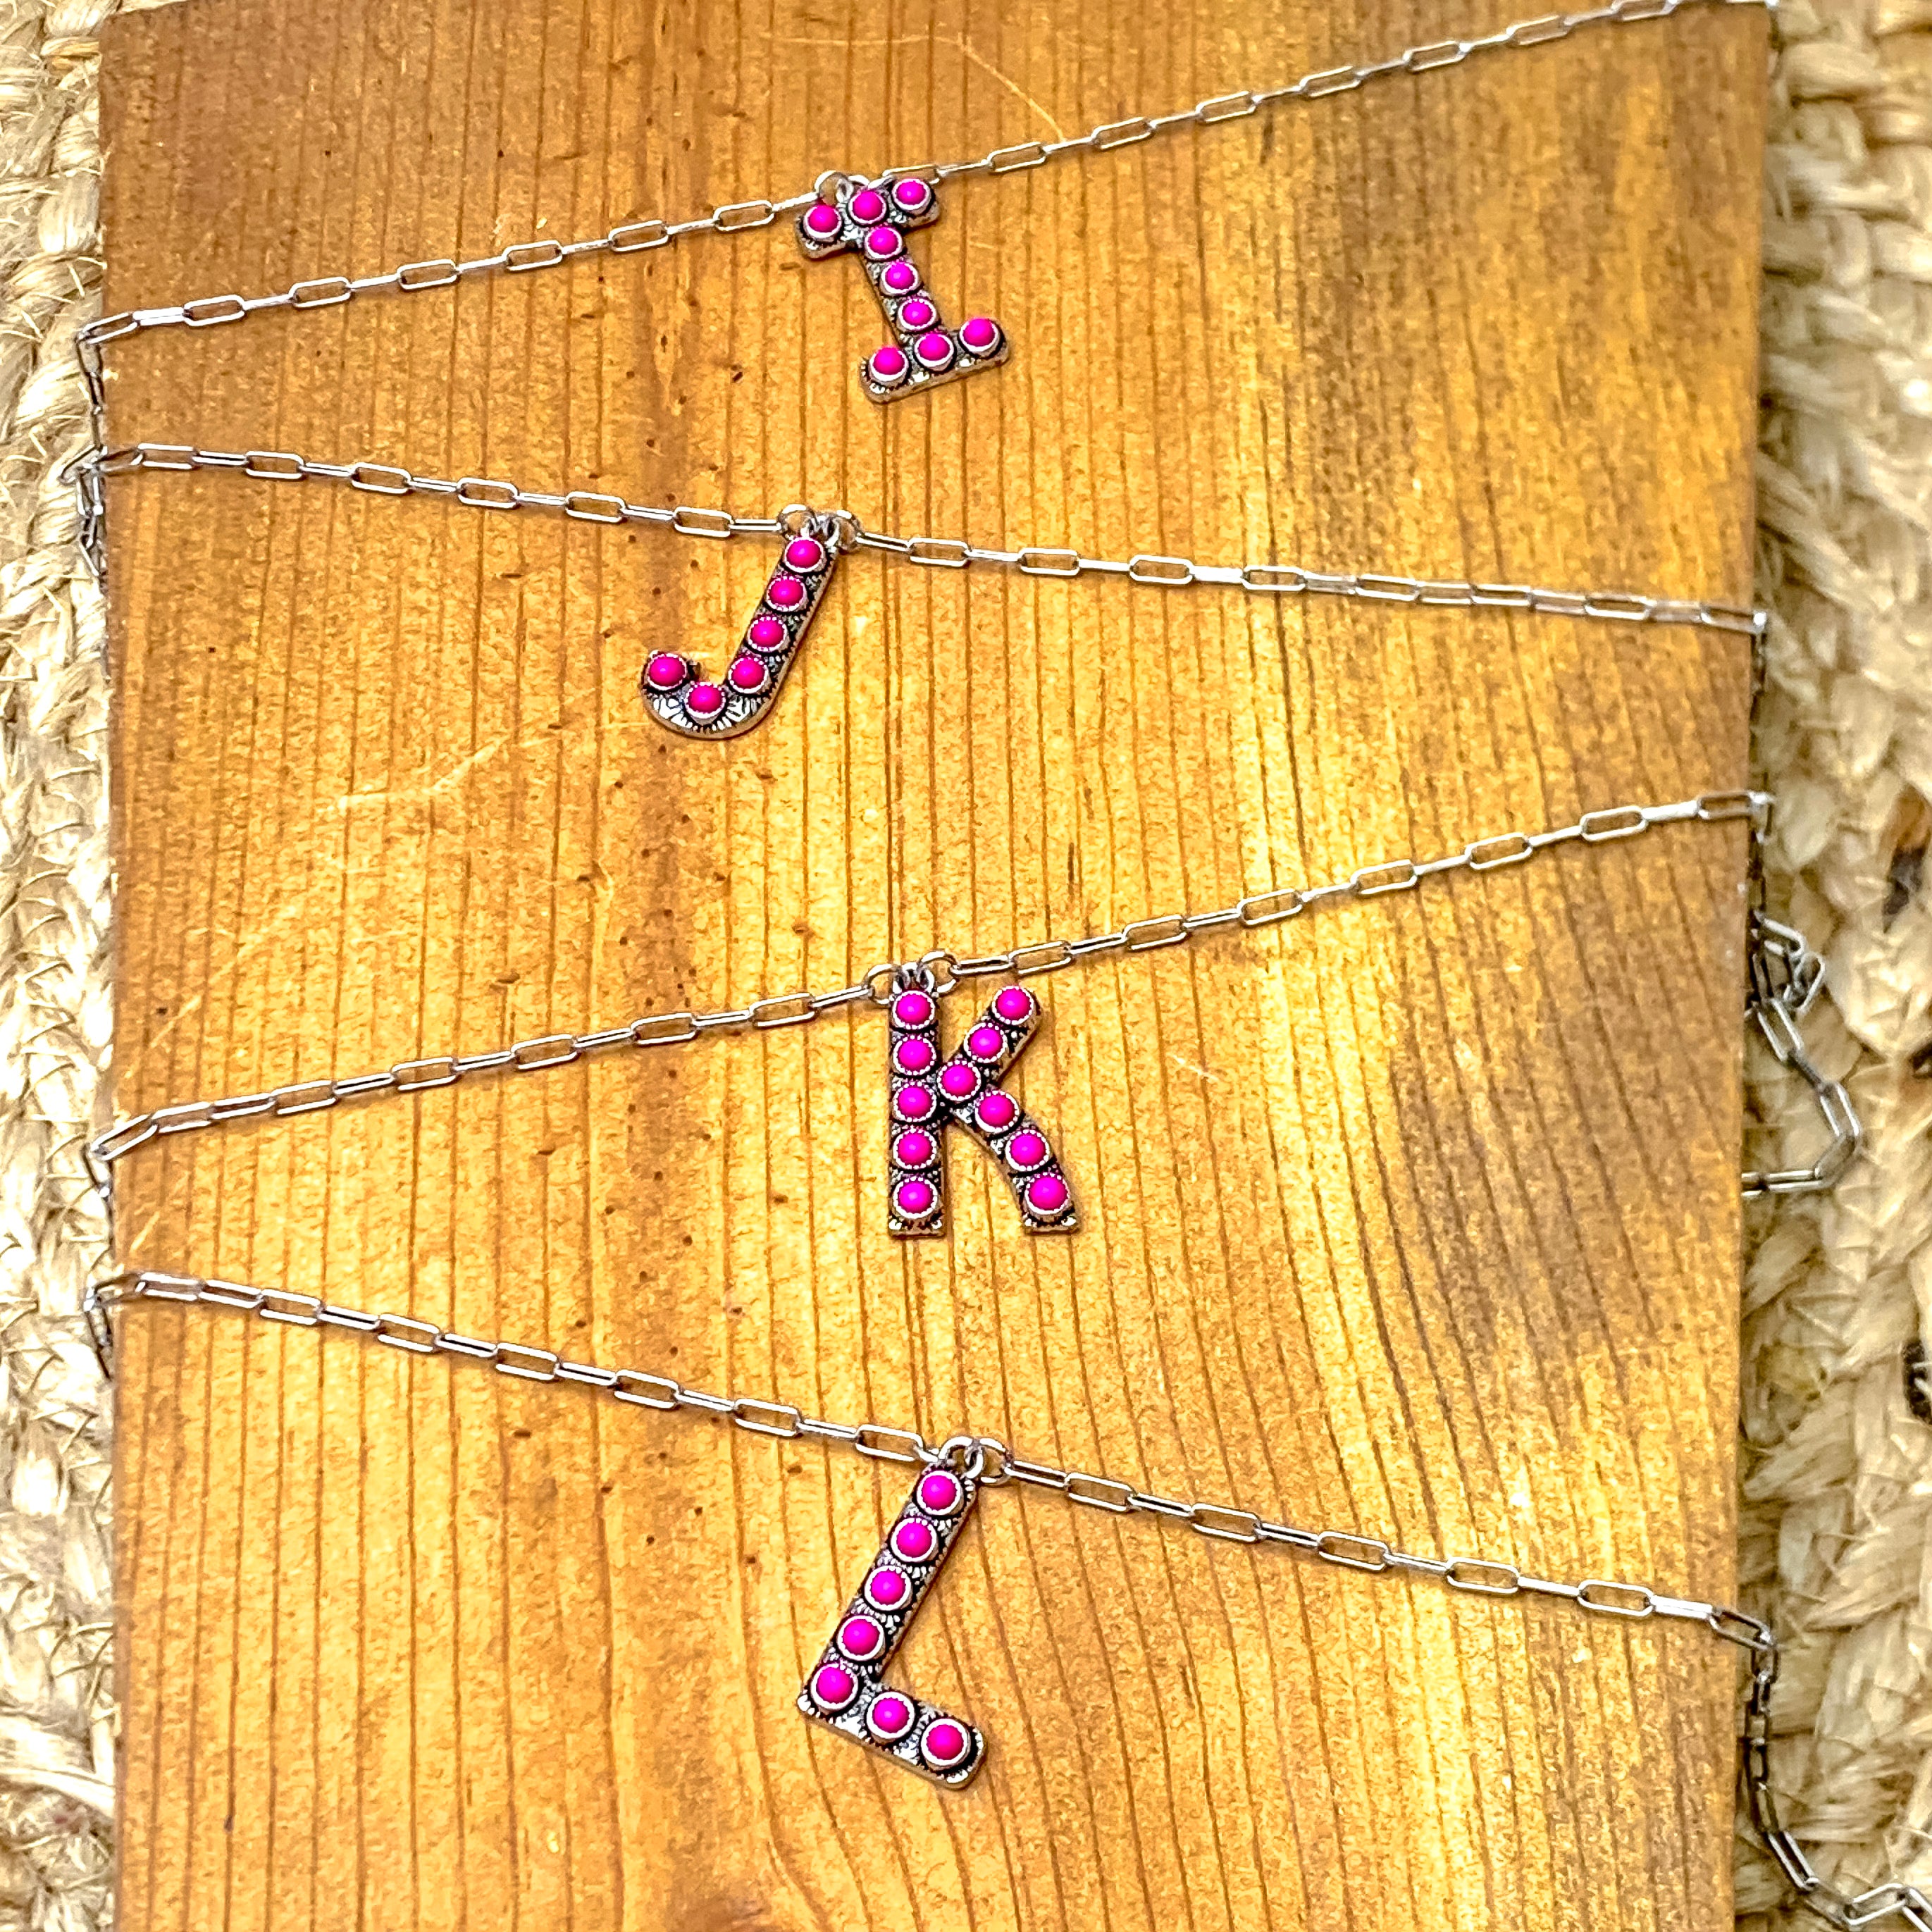 Wear It Proud Initial Necklaces in Fuchsia Pink - Giddy Up Glamour Boutique